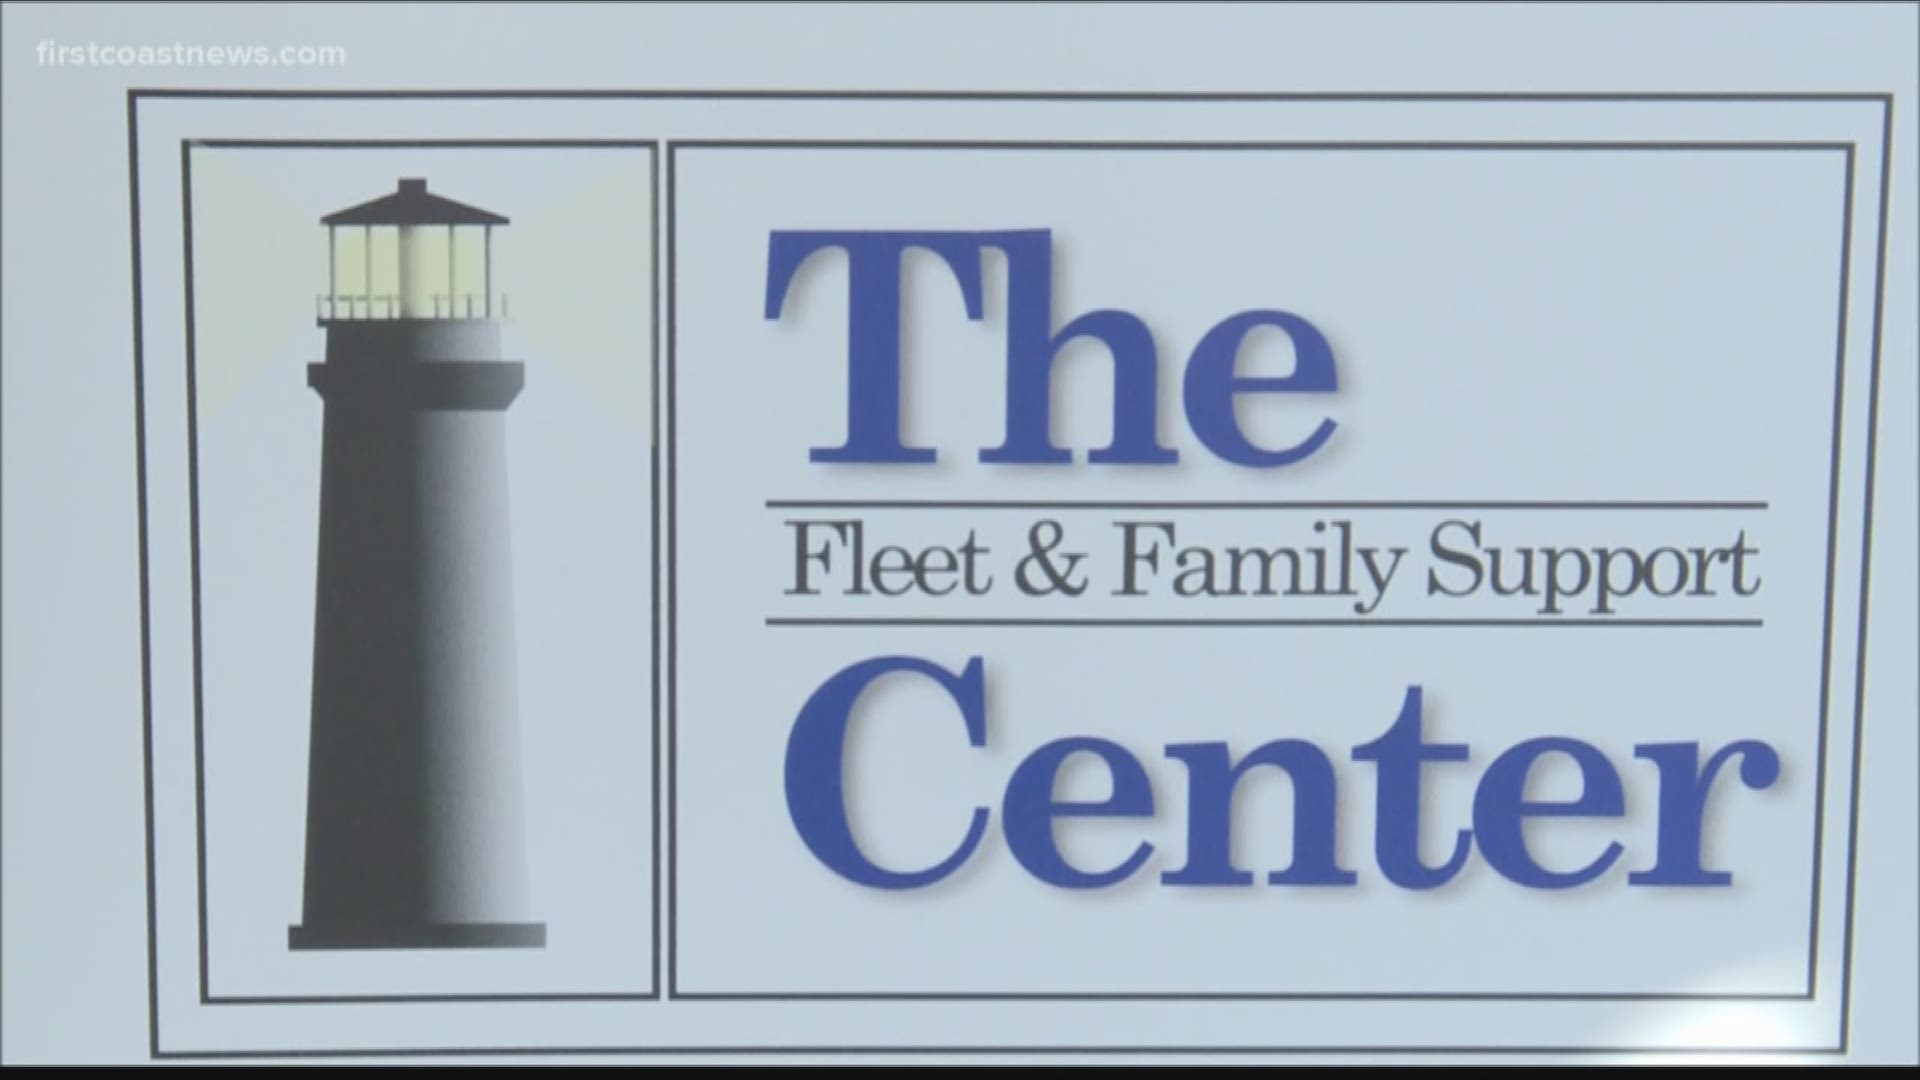 At the Fleet and Family Services Support Center members can get counseling and mental health services along with financial management and ways to handle stress.